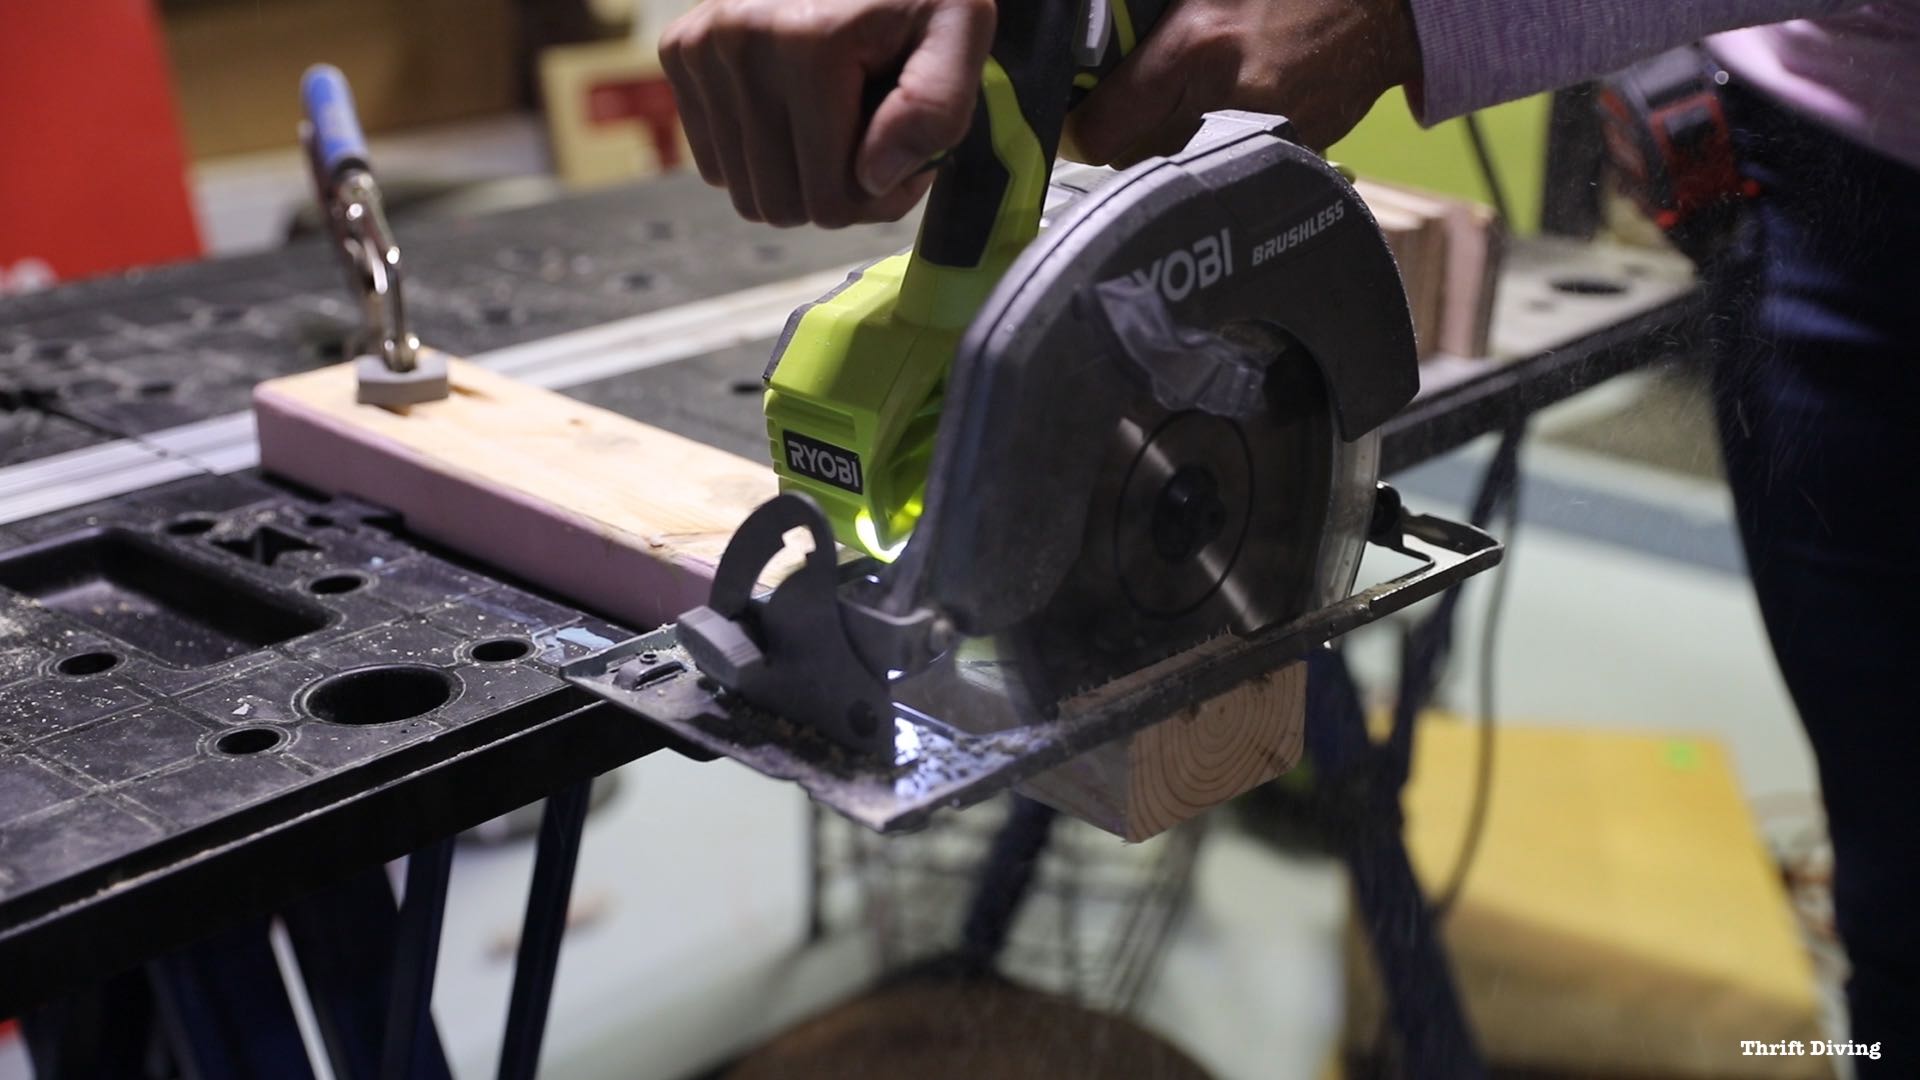 How to Use a Circular Saw - Circular saws can cut up nearly 2.5" when cut with a 7 and a quarter blade. - Cutting a 2x4 - Thrift Diving